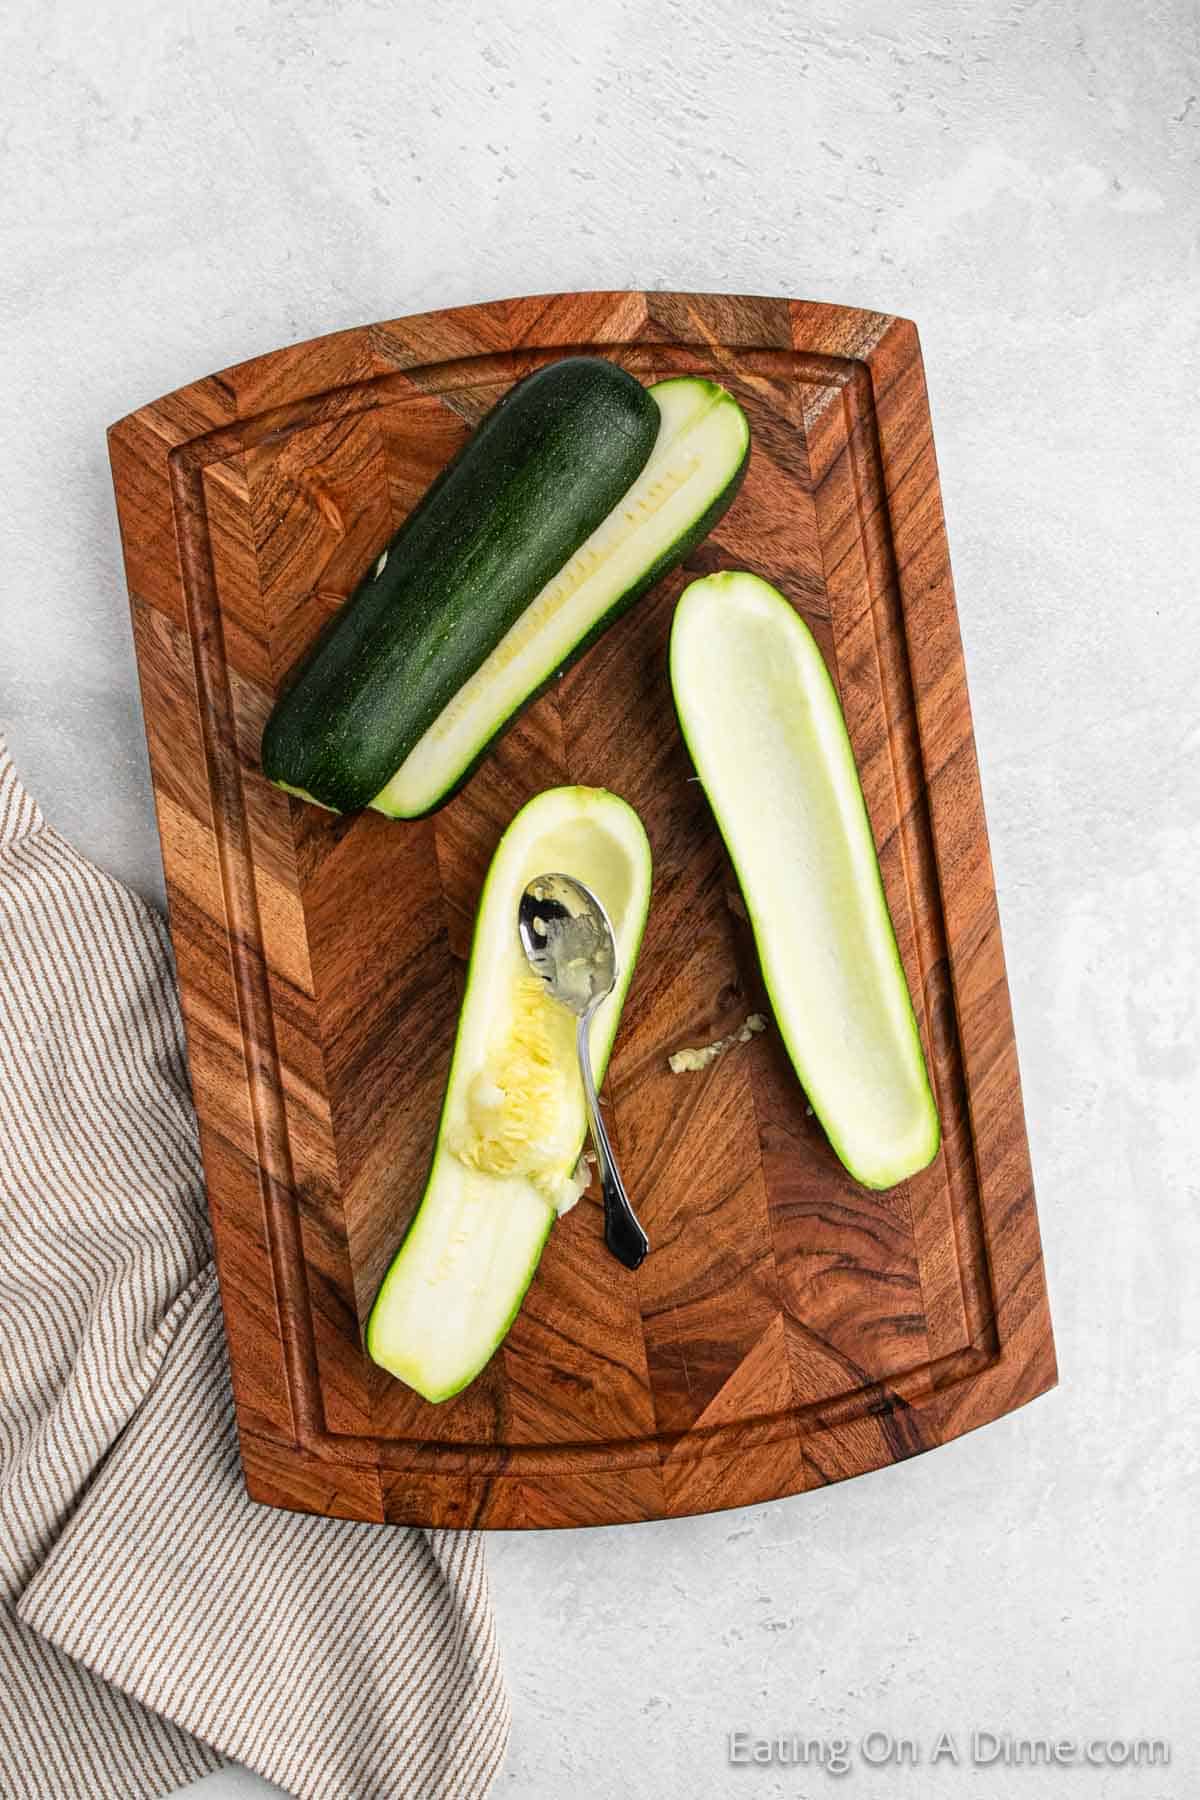 A wooden cutting board displays two zucchini, one of which is halved and partially hollowed out with a spoon, prepped for a stuffed zucchini boats recipe. A striped kitchen towel is partially visible on the left side of the board, resting on a light gray surface.